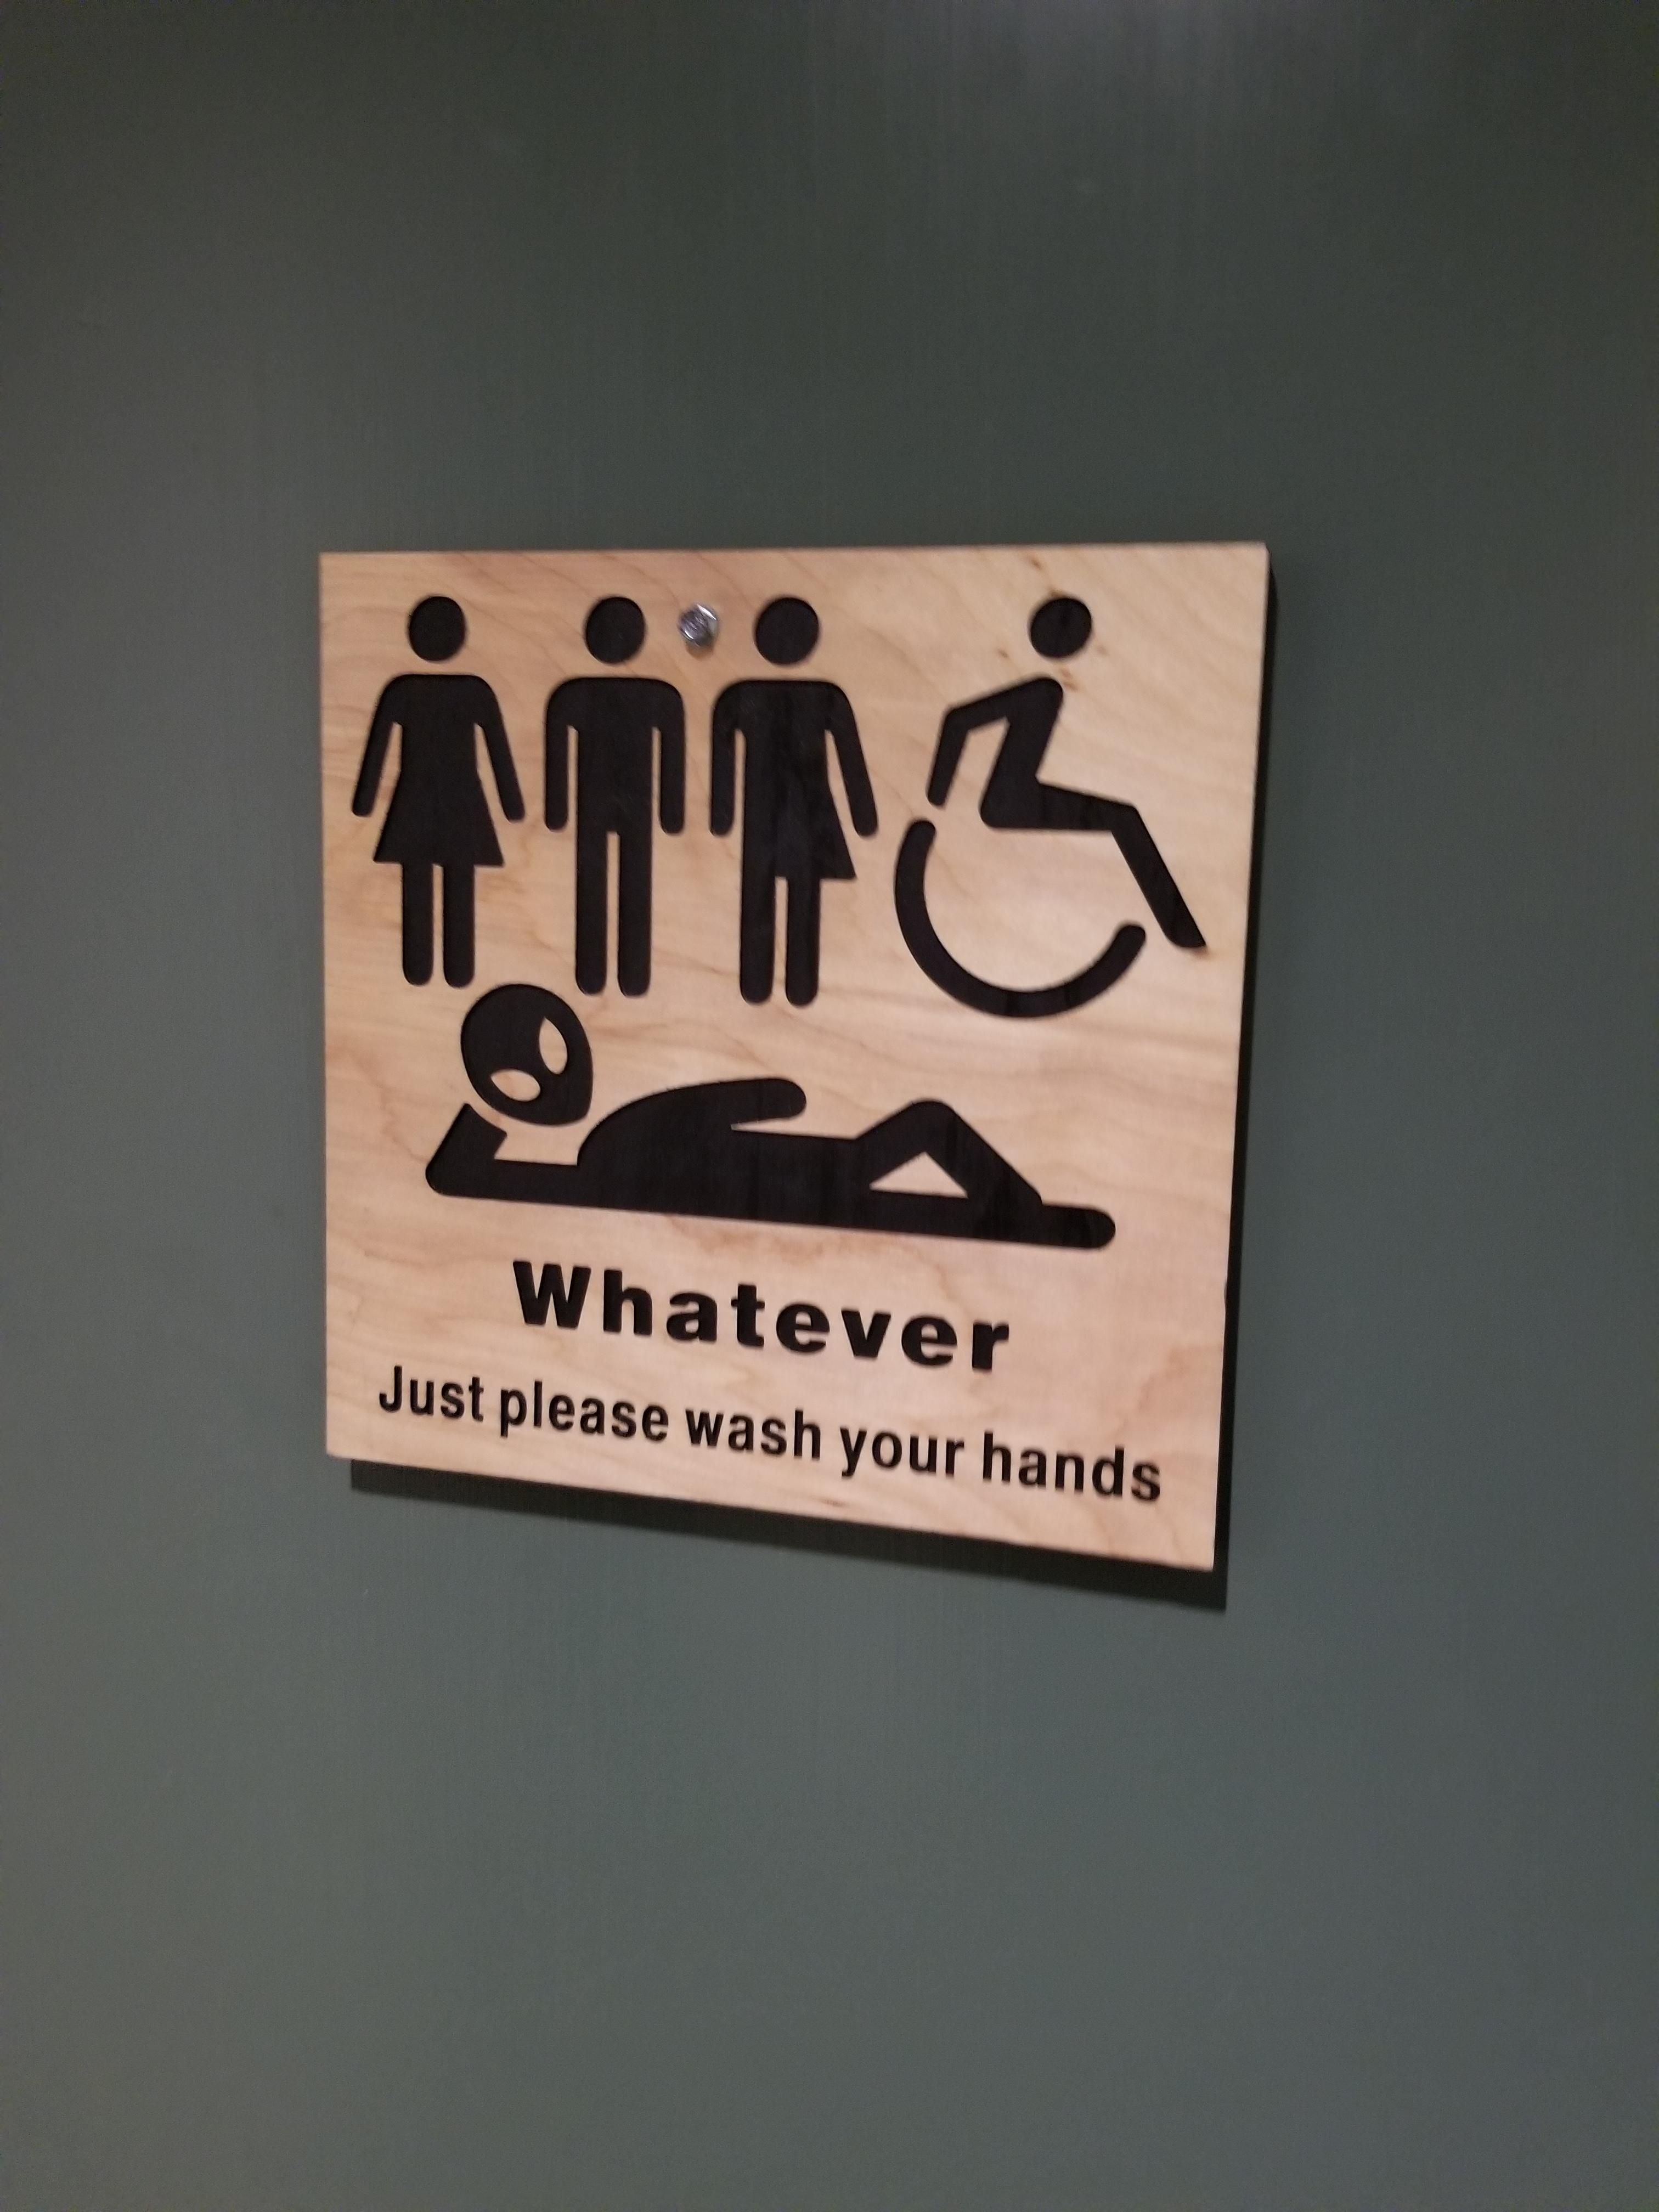 These bathroom signs